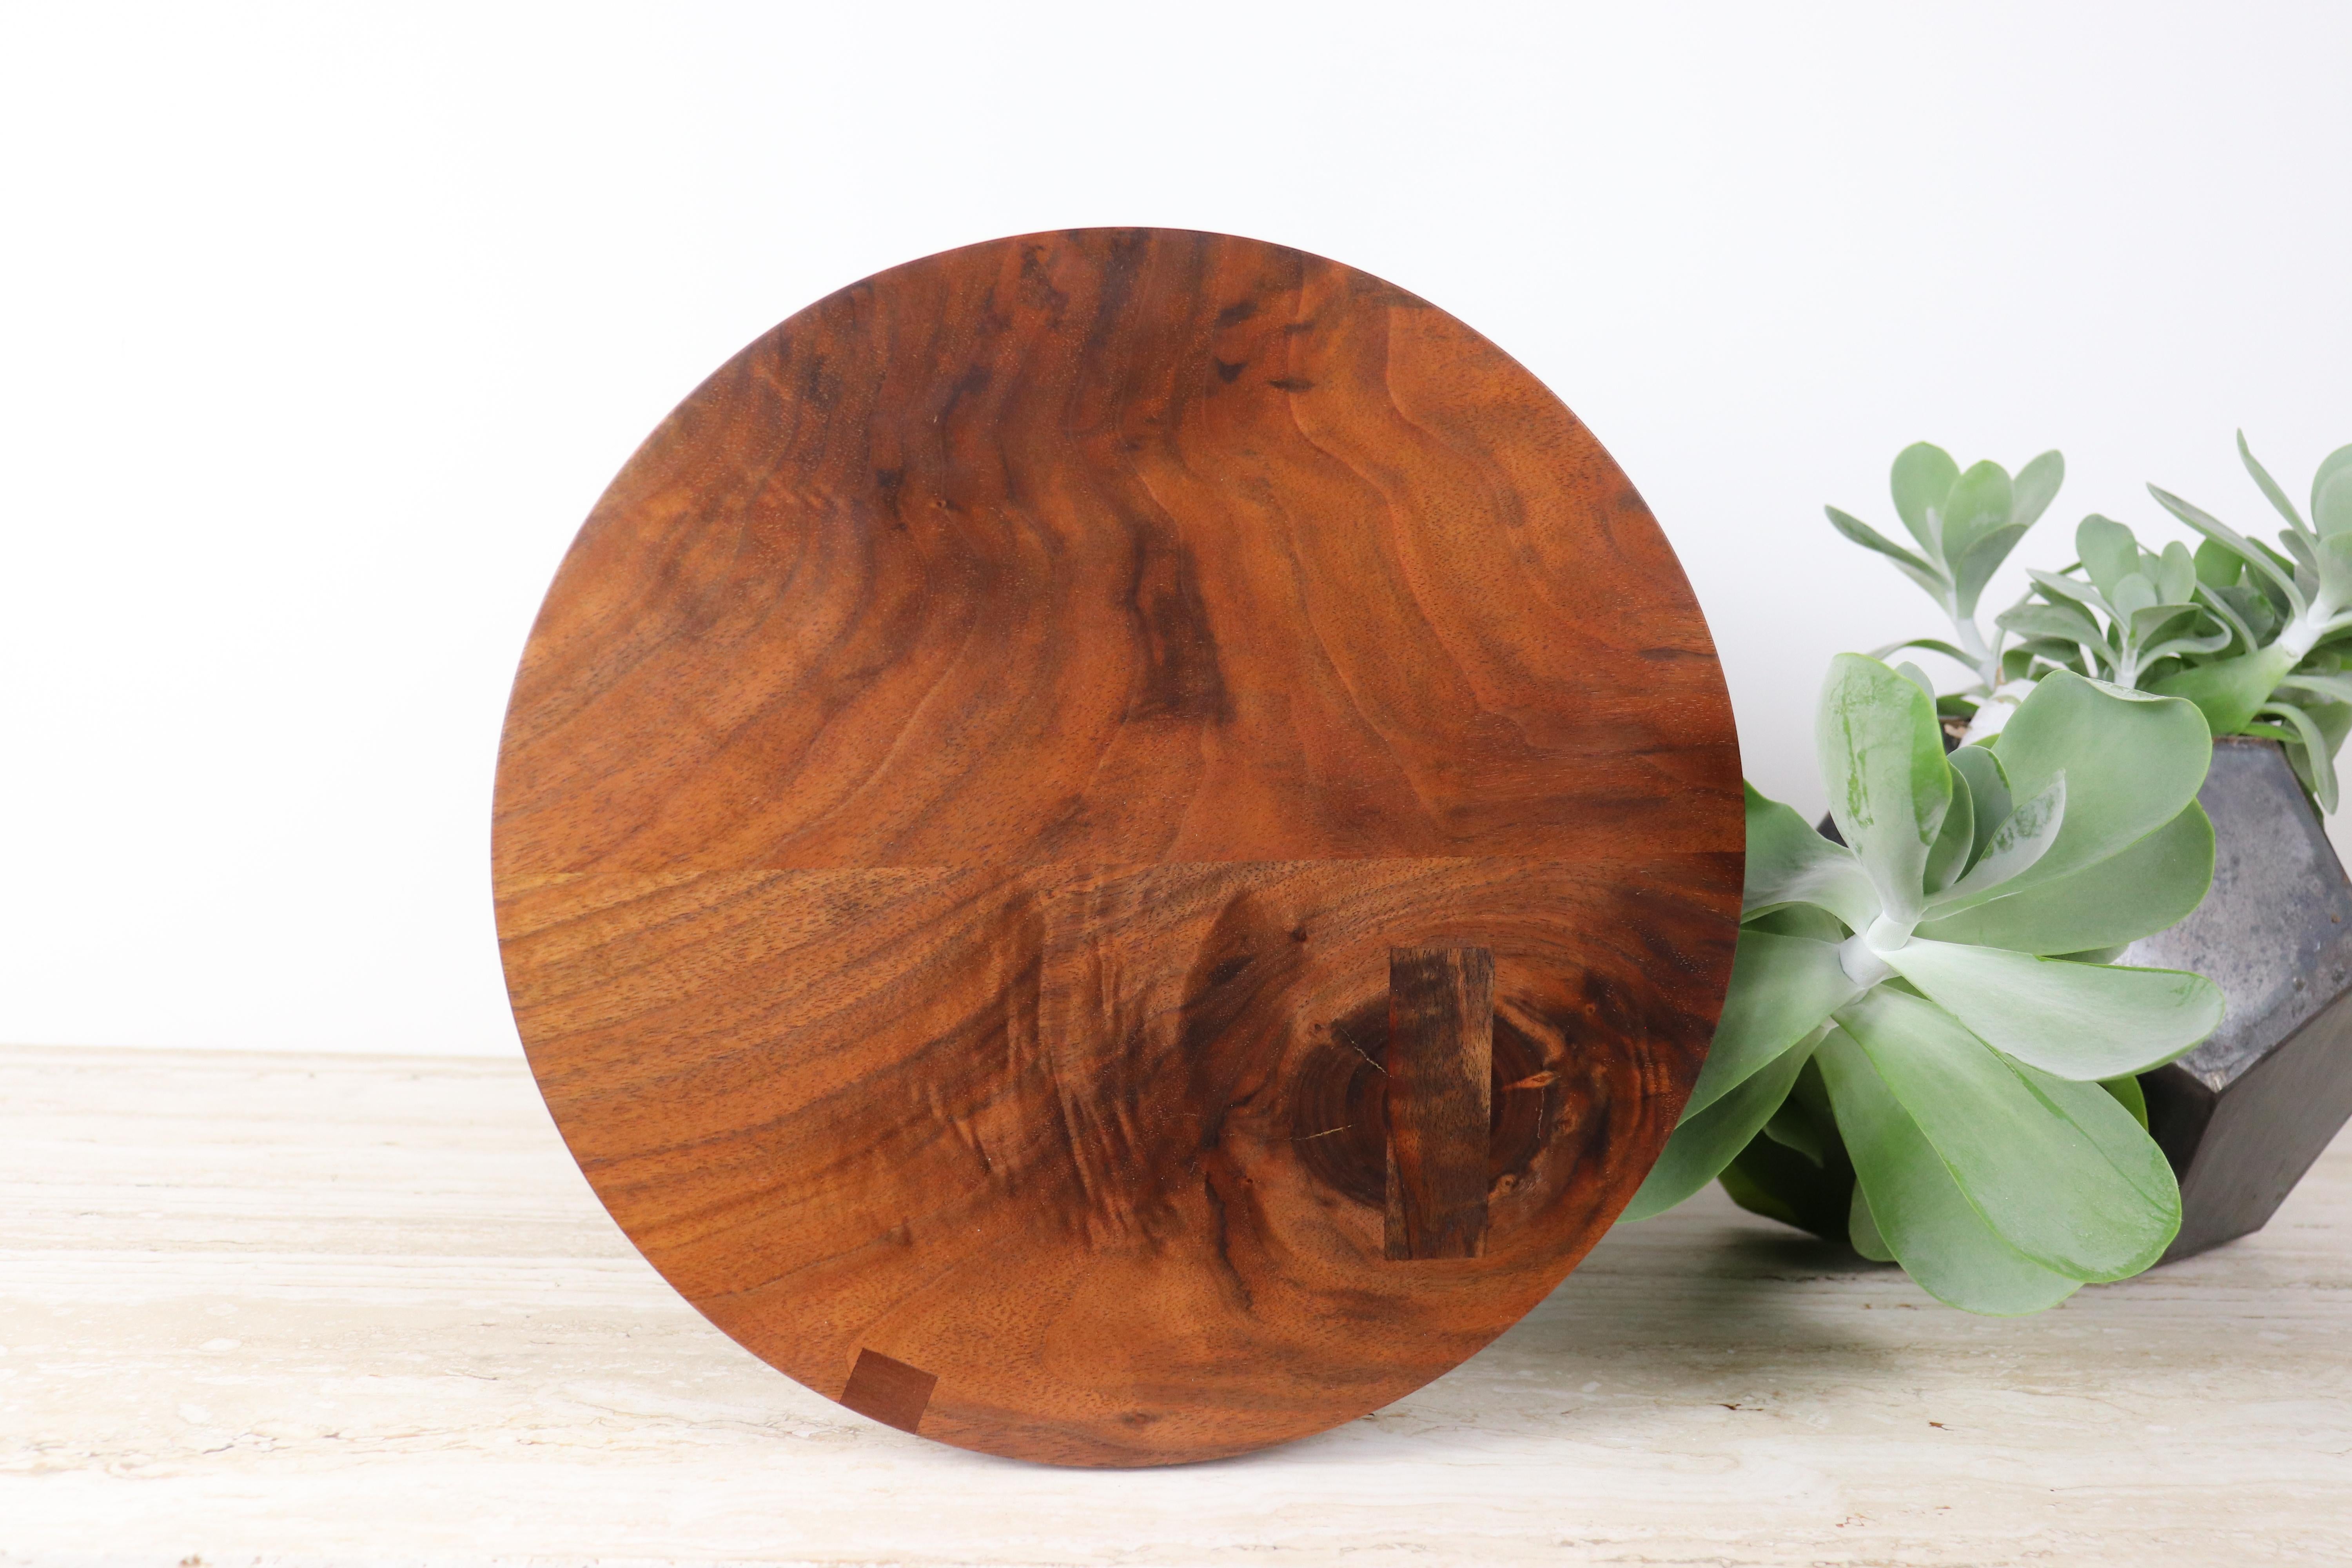 Solid wood stool / side table in stunning hand oiled Oregon back walnut with exquisite Dutchman details to infill natural voids in the wood. With a clean and minimal design, these stools are handmade in Portland, Oregon with mortise and Tenon